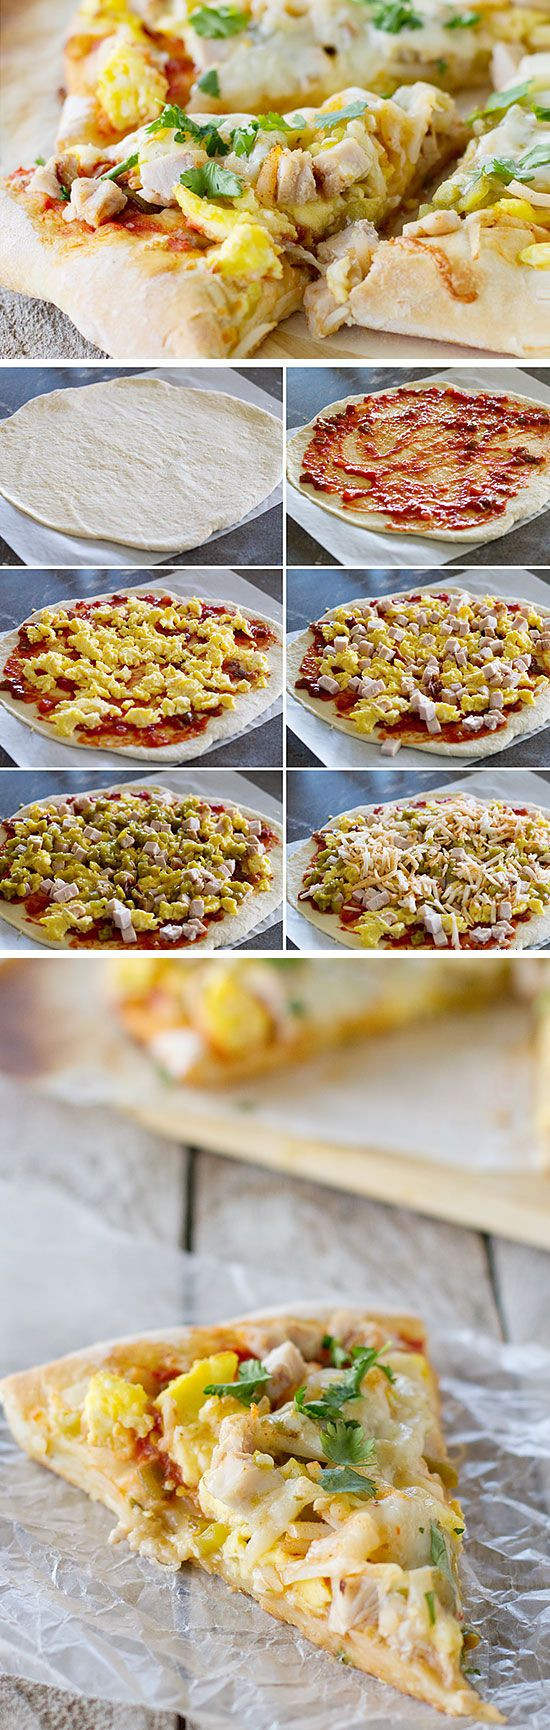 Fall Dinners For A Crowd
 28 Leftover Thanksgiving Recipes for a Crowd